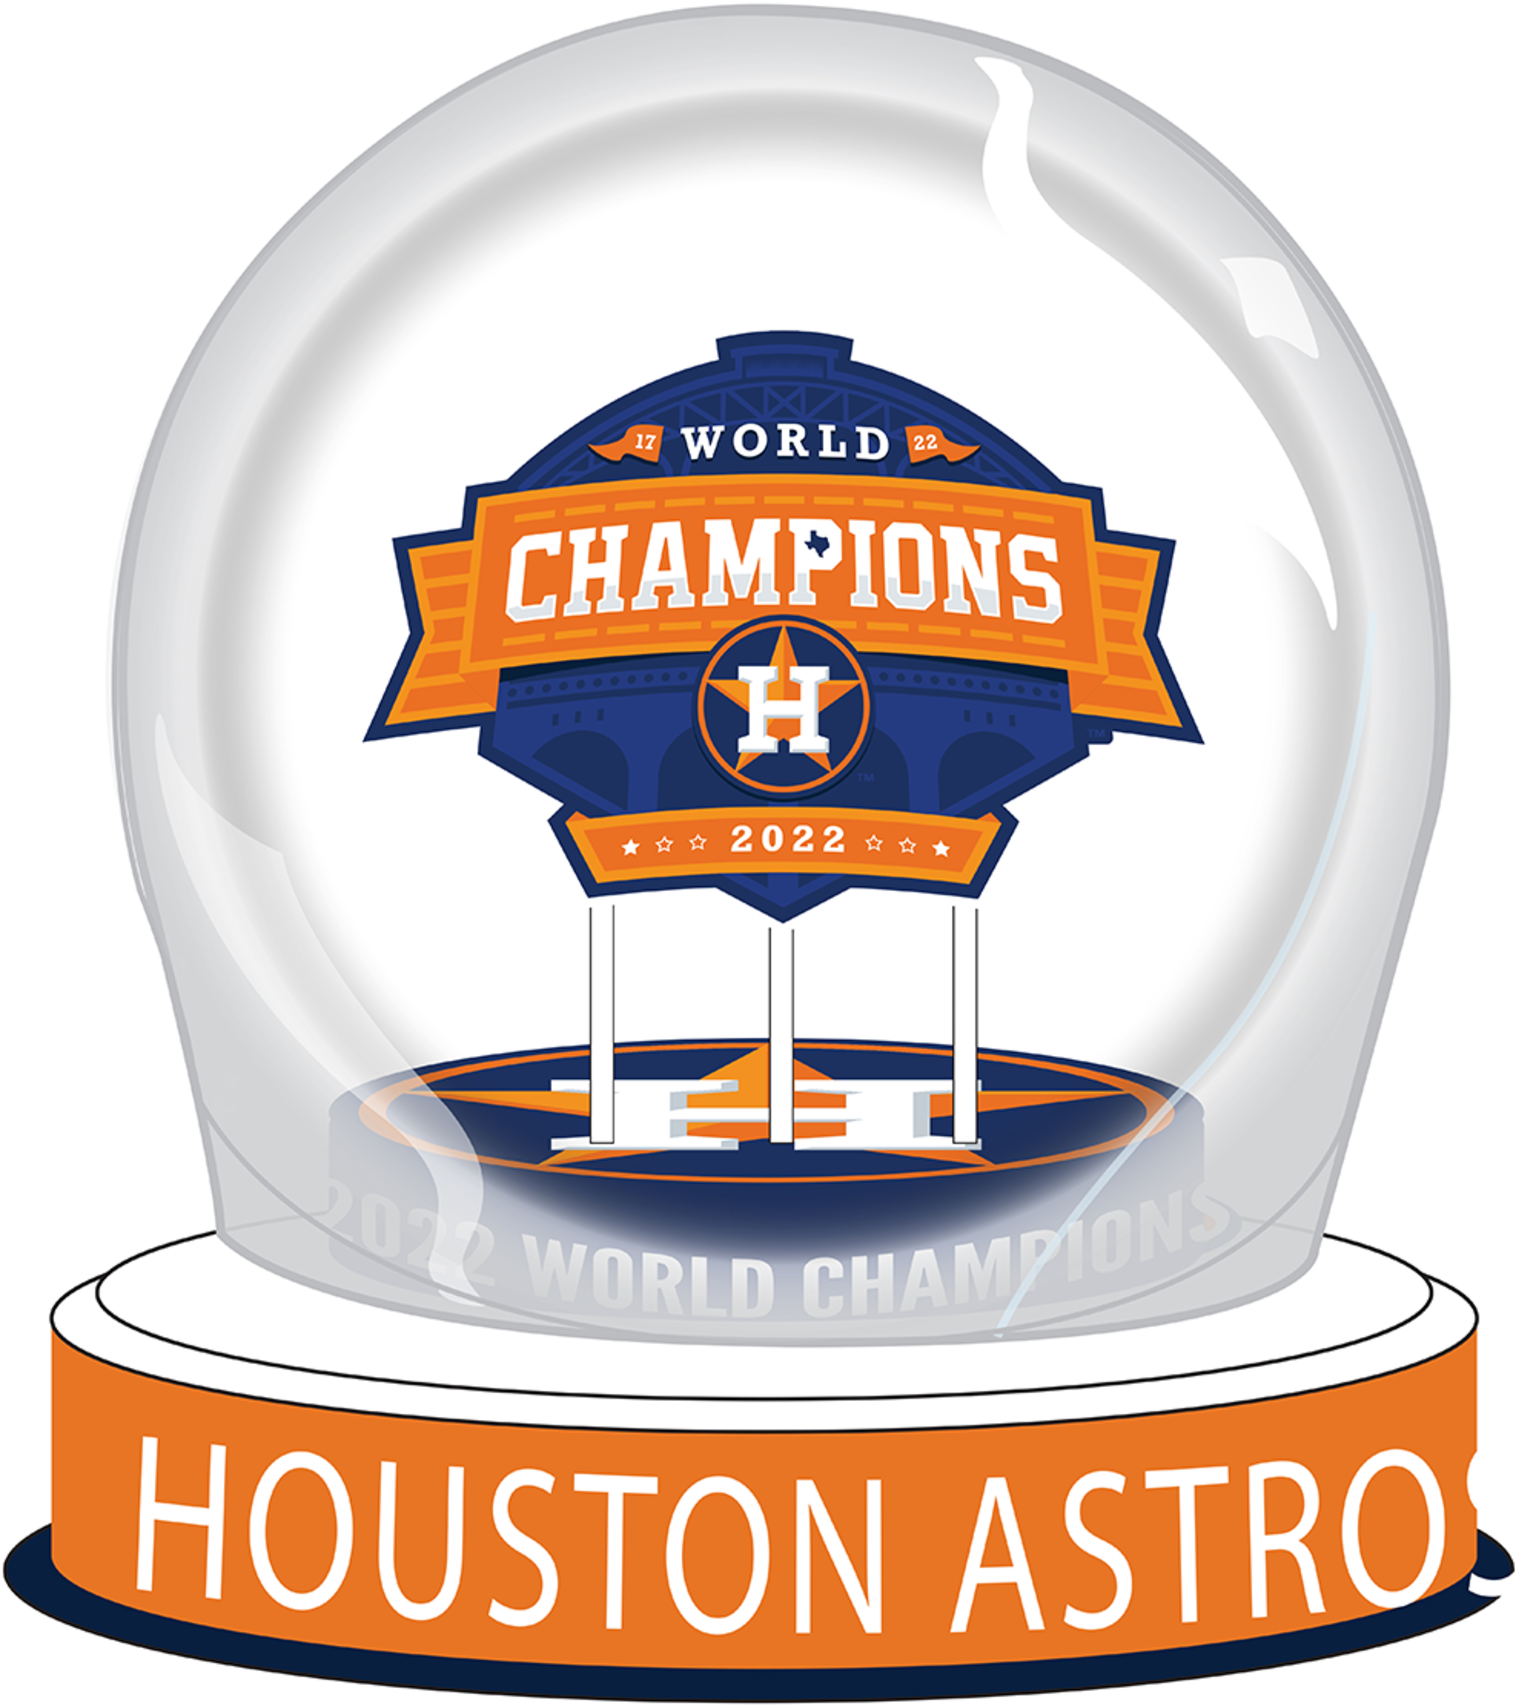 Houston Astros - For just $30, children 12 and under can